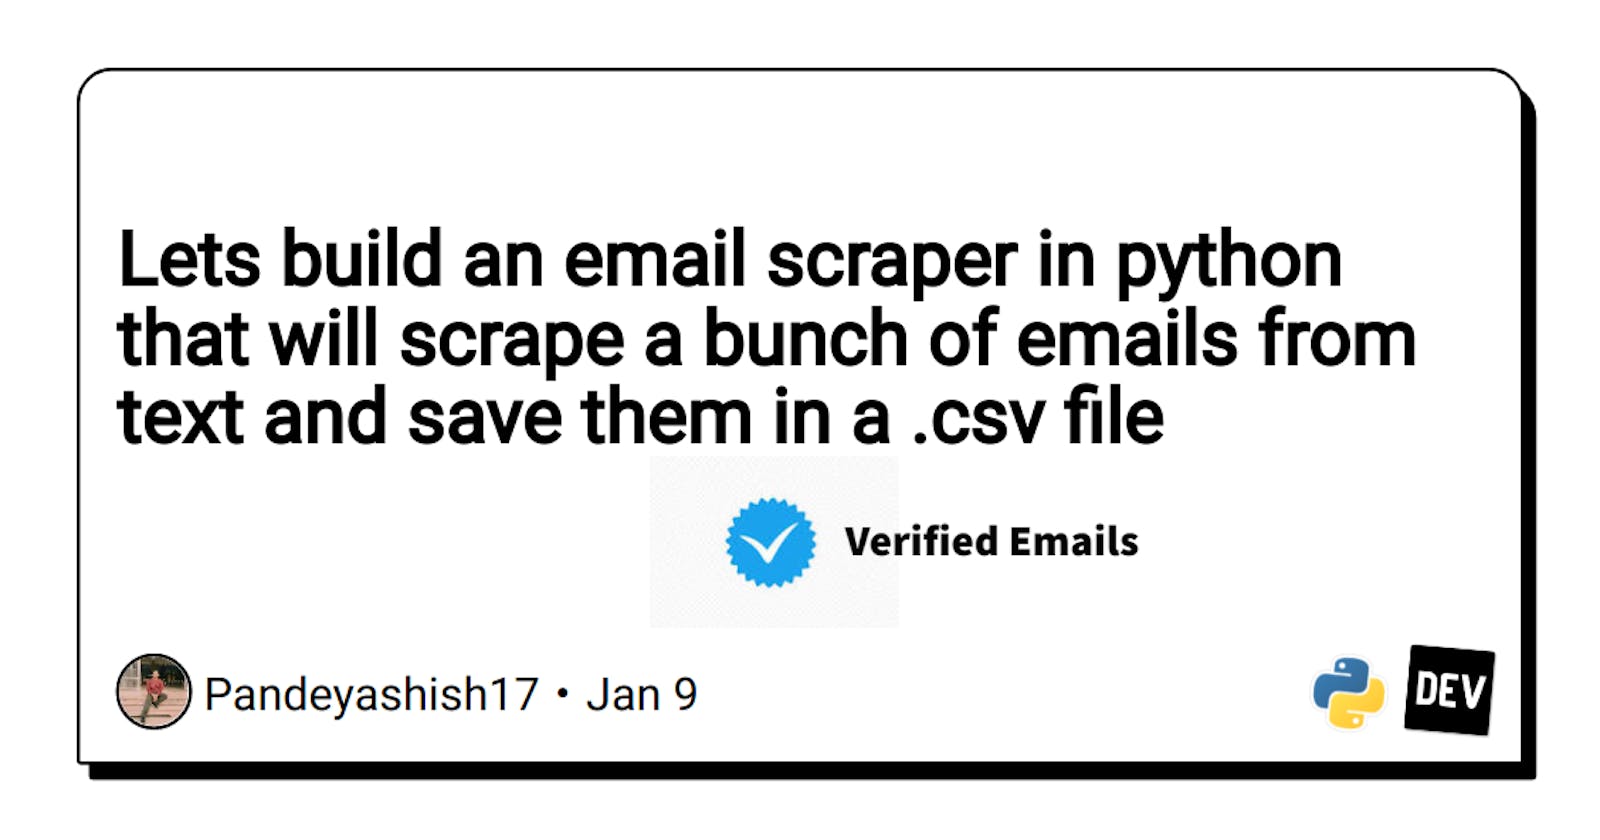 Lets build an email scraper in python that will scrape a bunch of emails from text and save them in a .csv file